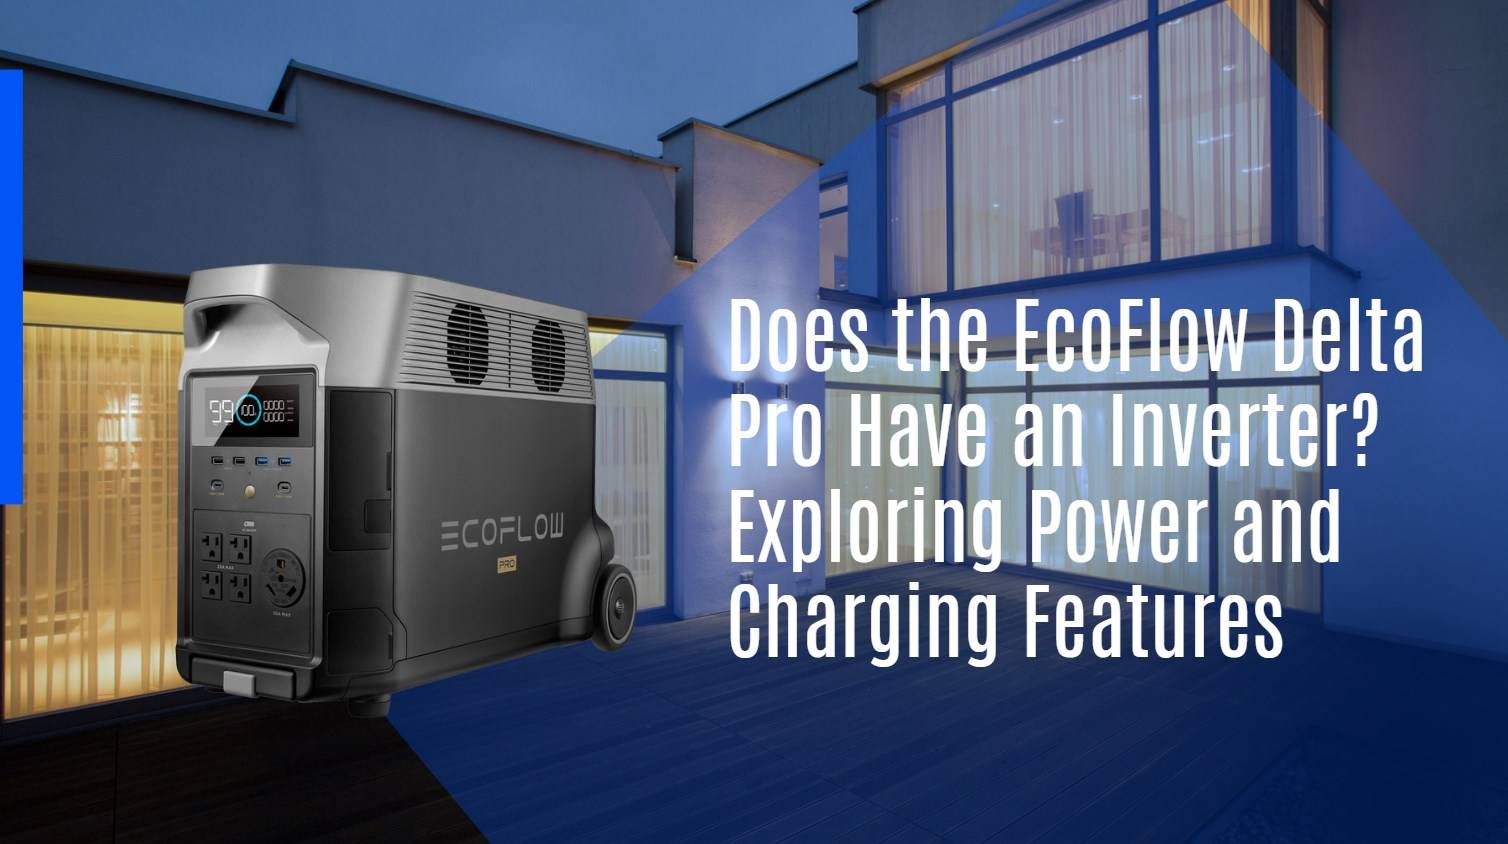 Does the EcoFlow Delta Pro Have an Inverter? Exploring Power and Charging Features